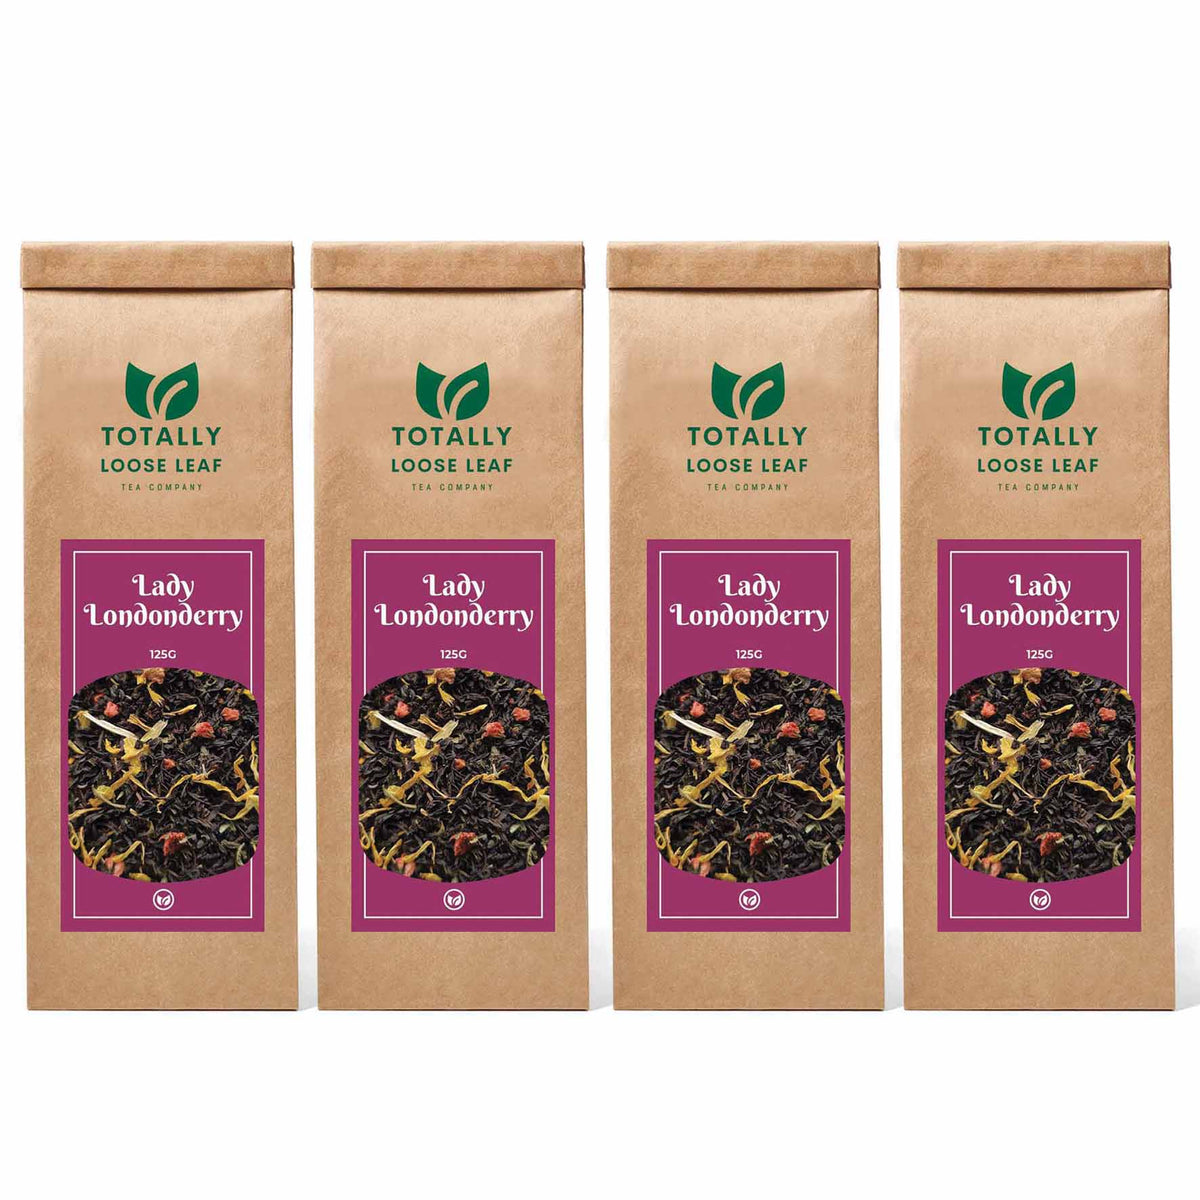 Lady Londonderry Afternoon Loose Leaf Tea - four pouches